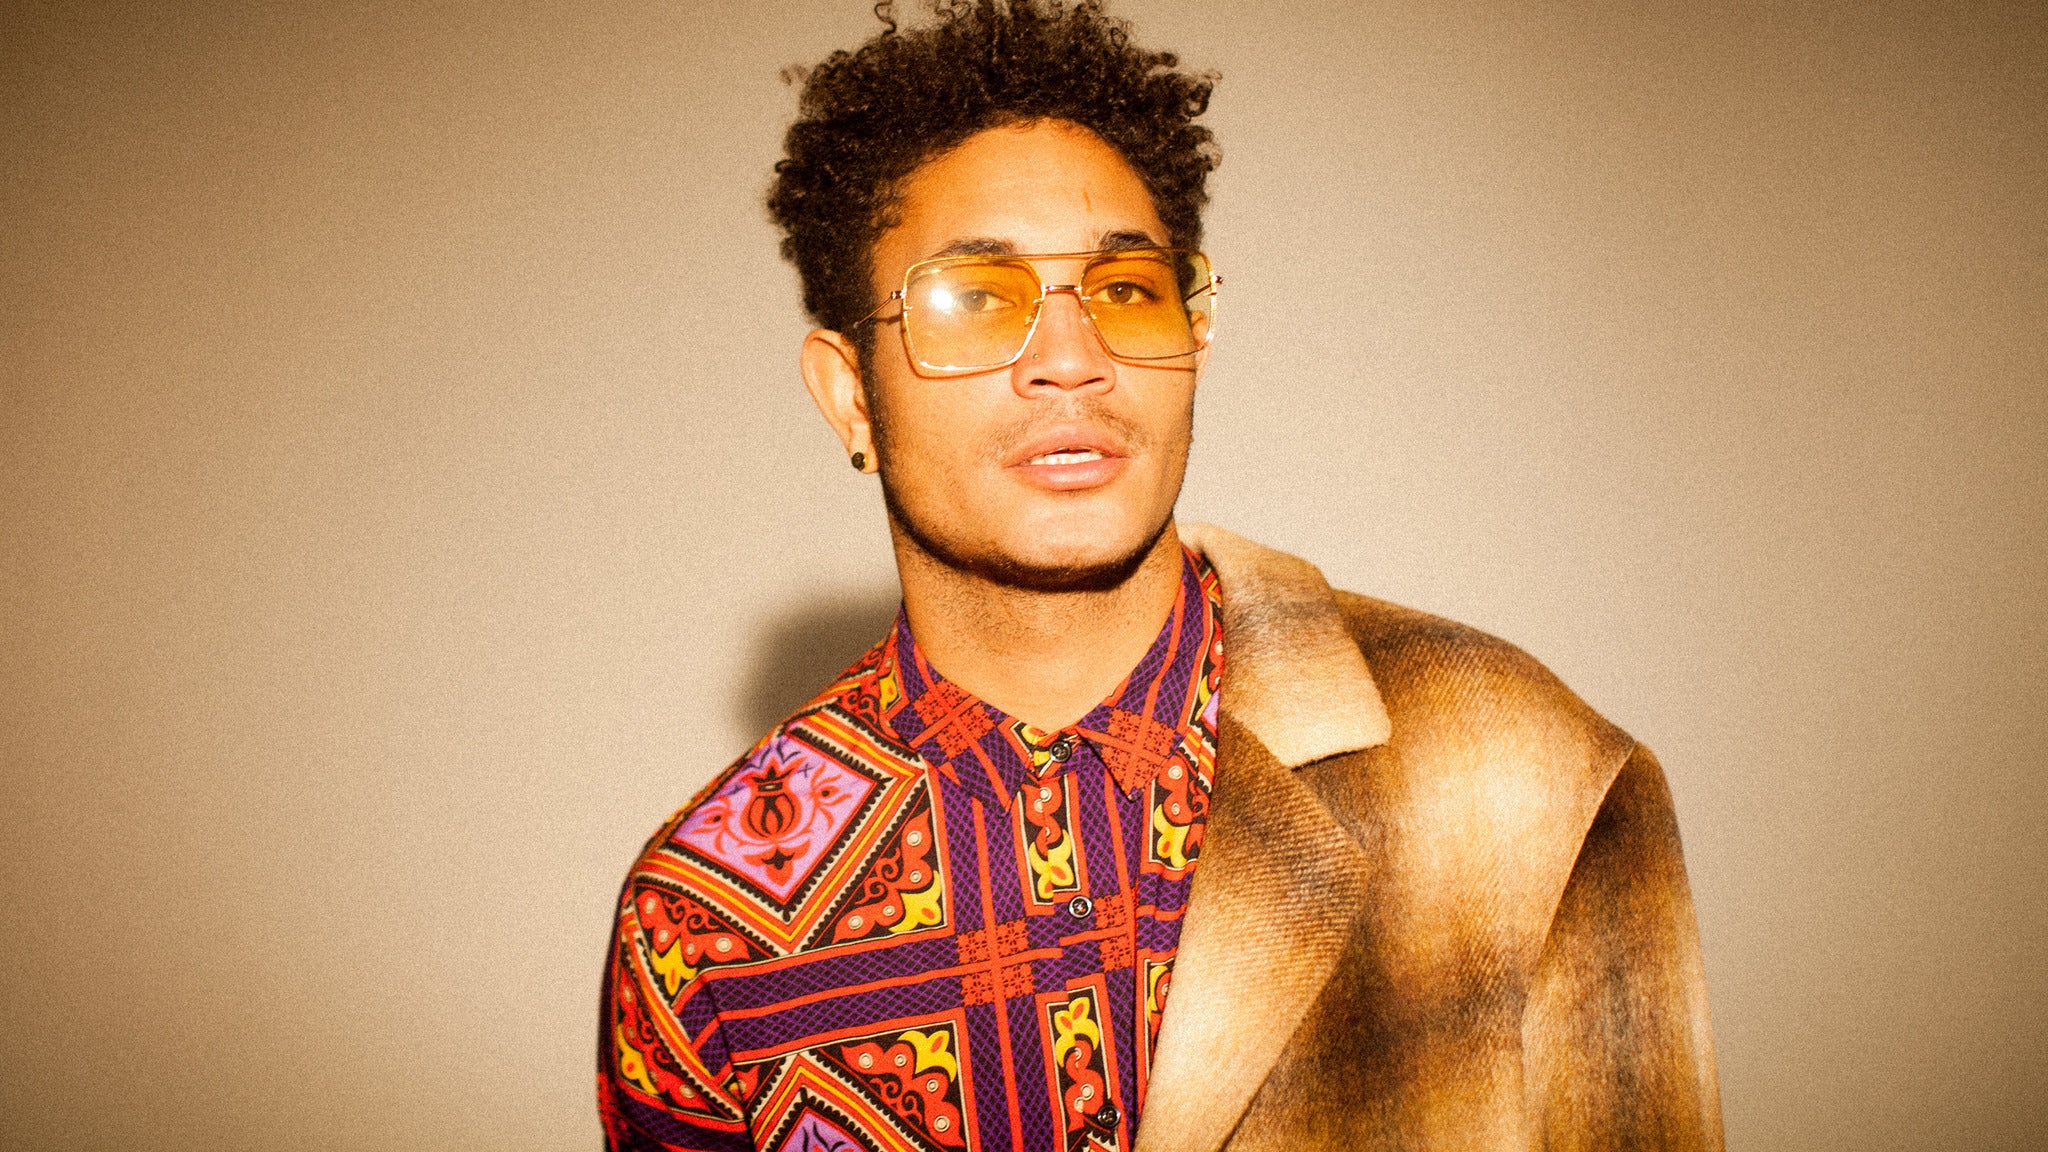 Bryce Vine in Indianapolis promo photo for Live Nation Mobile App presale offer code